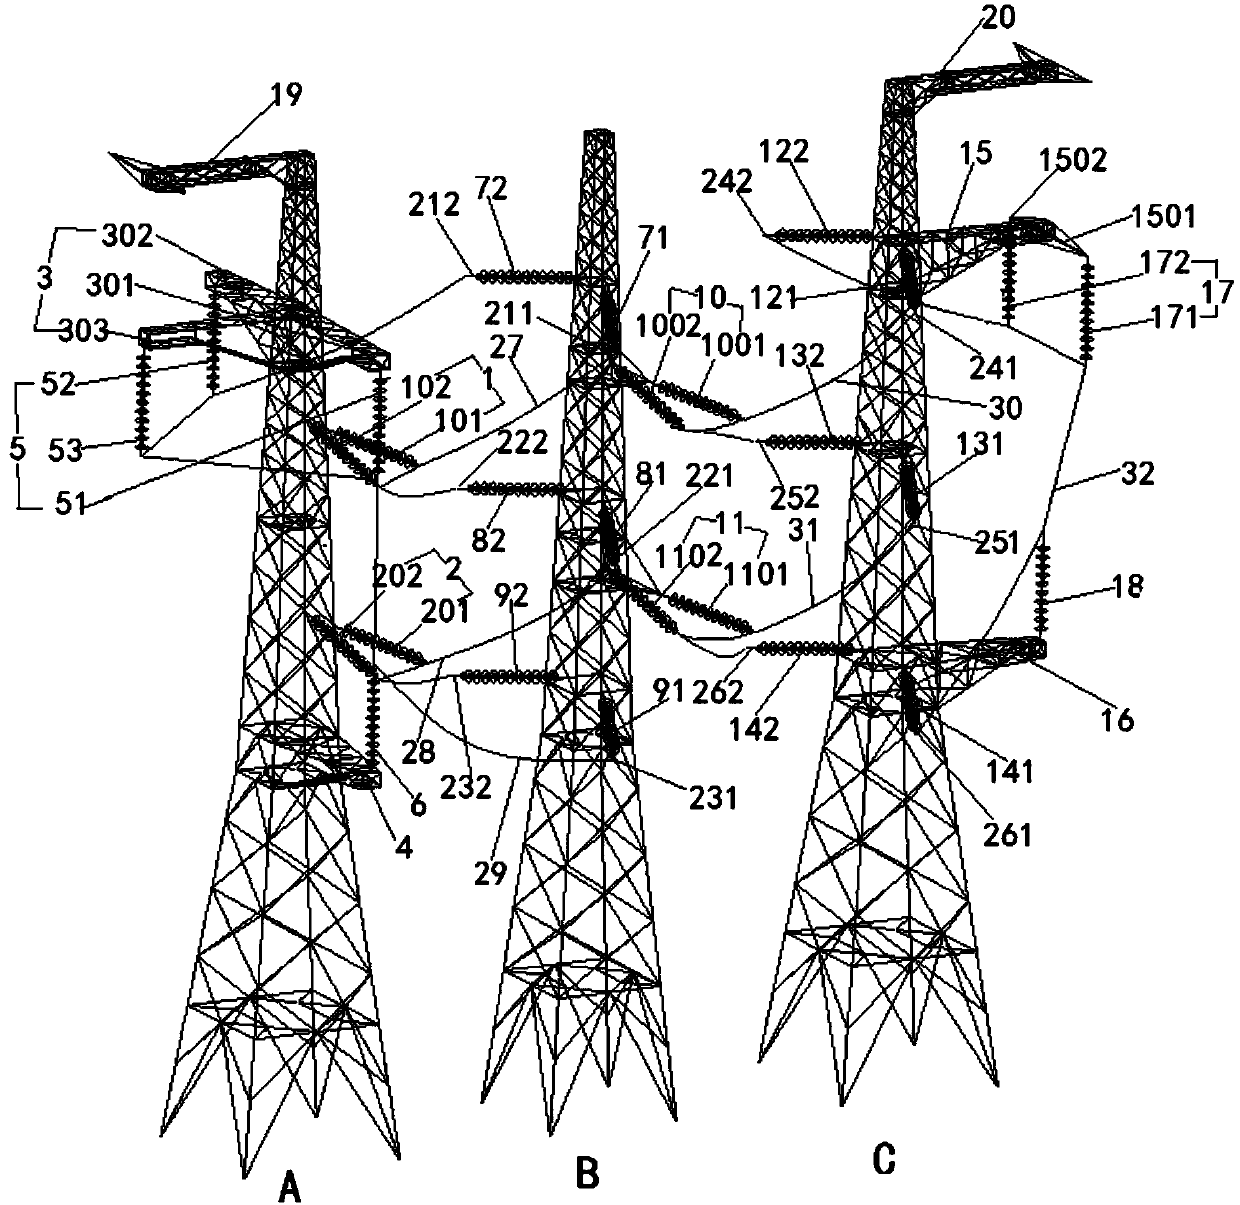 Double-circuit transposition tower and transposition method